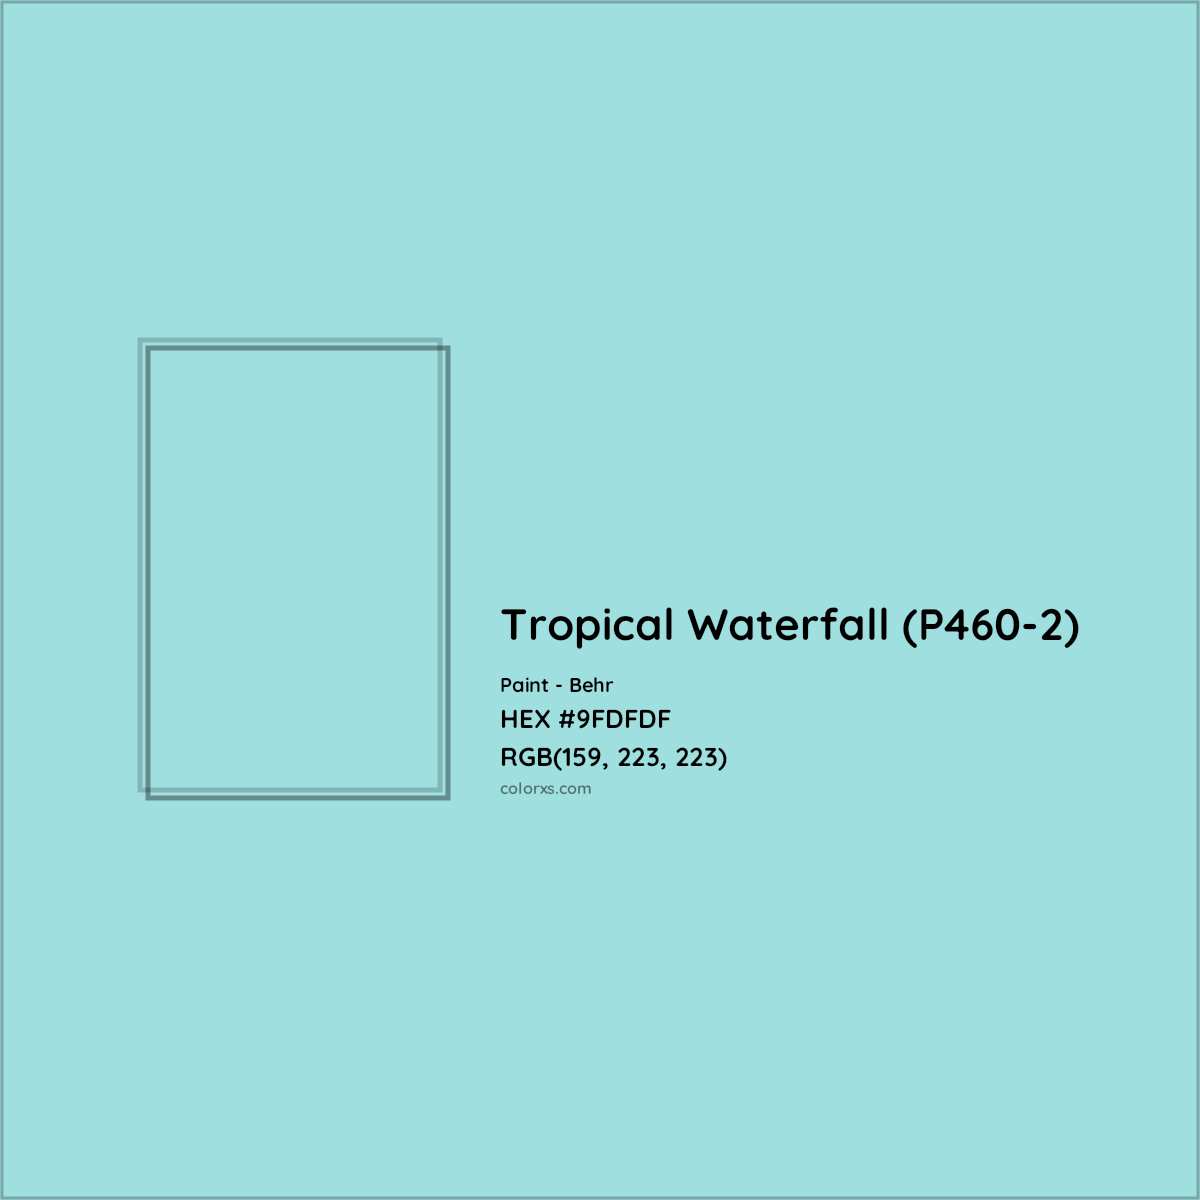 HEX #9FDFDF Tropical Waterfall (P460-2) Paint Behr - Color Code